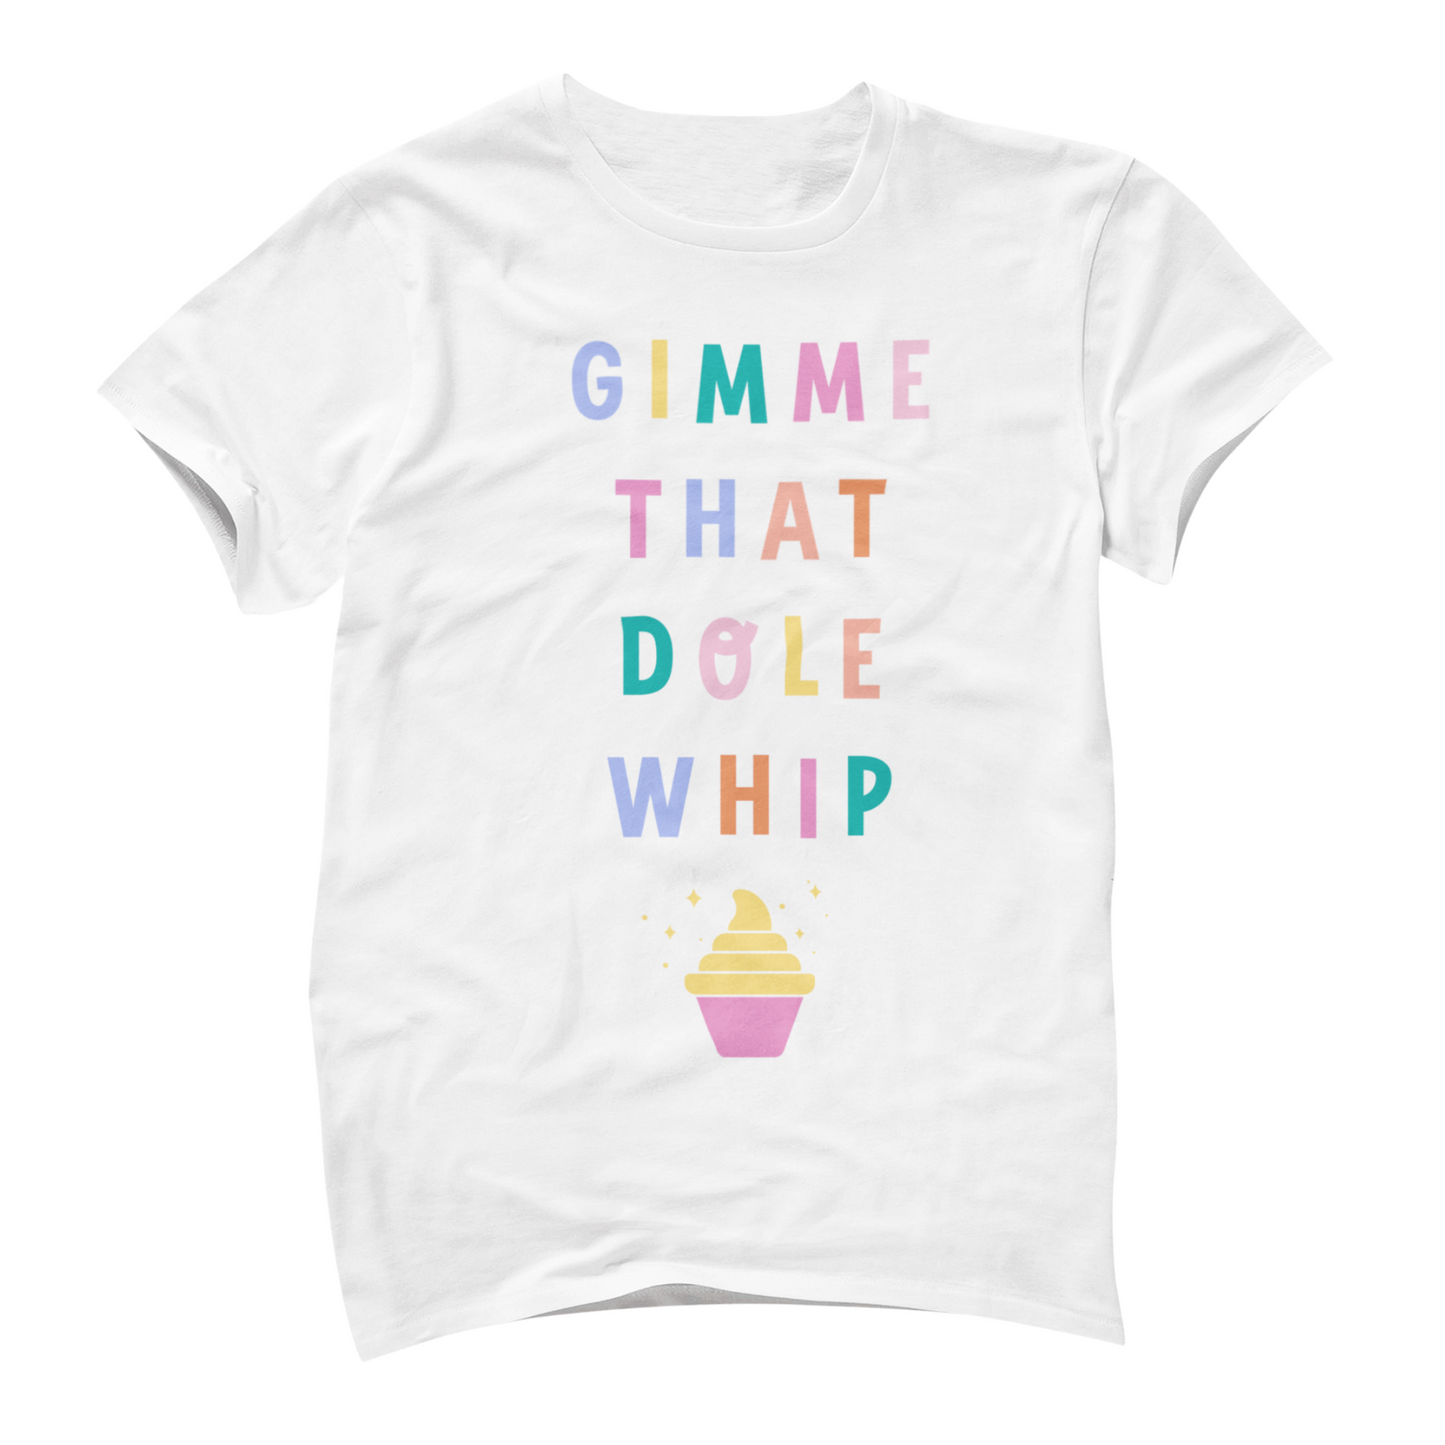 Gimme That Dole Whip Shirt